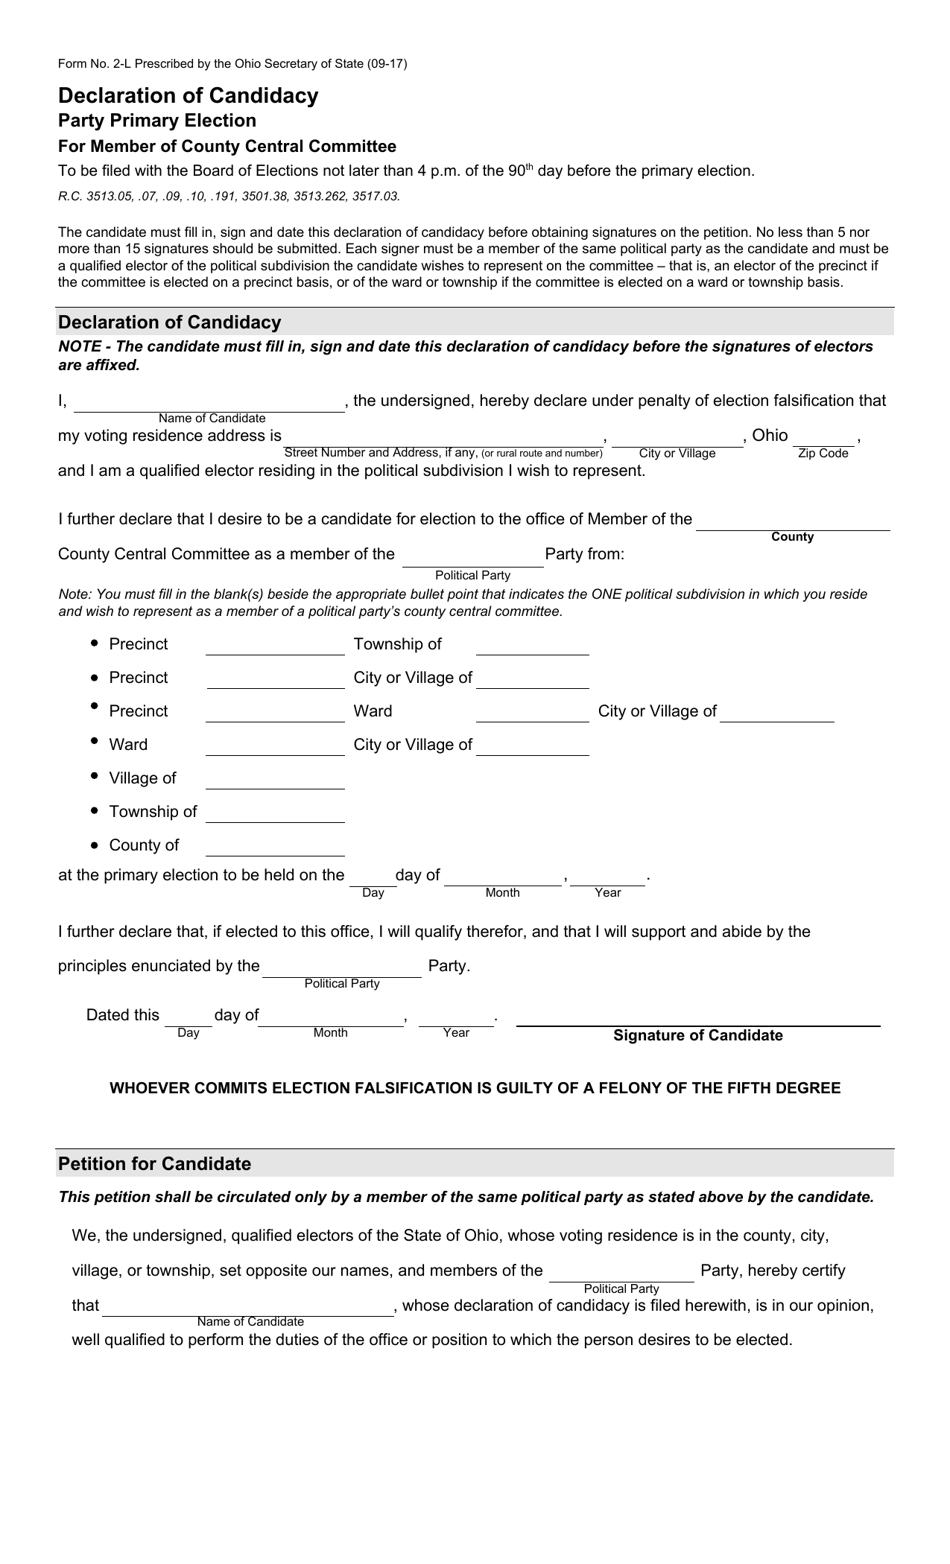 Form 2-L Declaration of Candidacy - Party Primary - County Central Committee - Ohio, Page 1